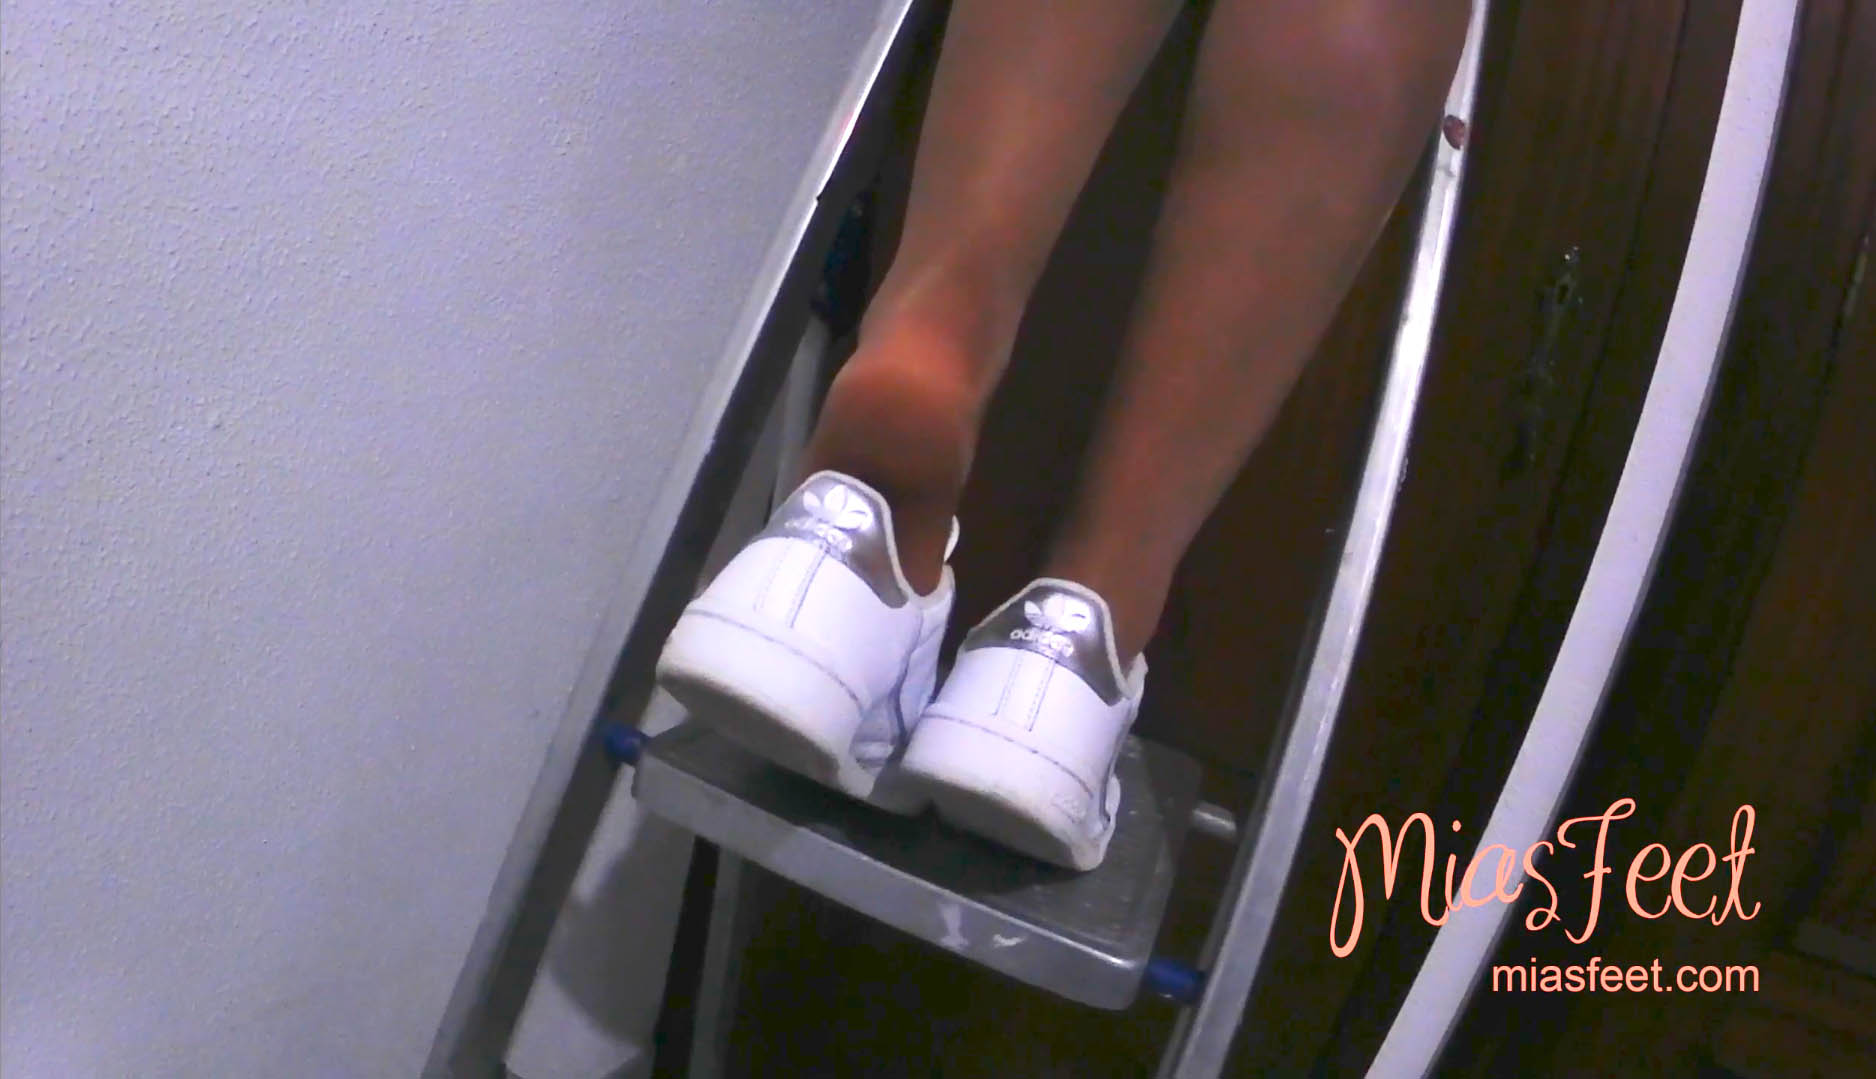 taking off my shoe on the ladder showing my feet sole